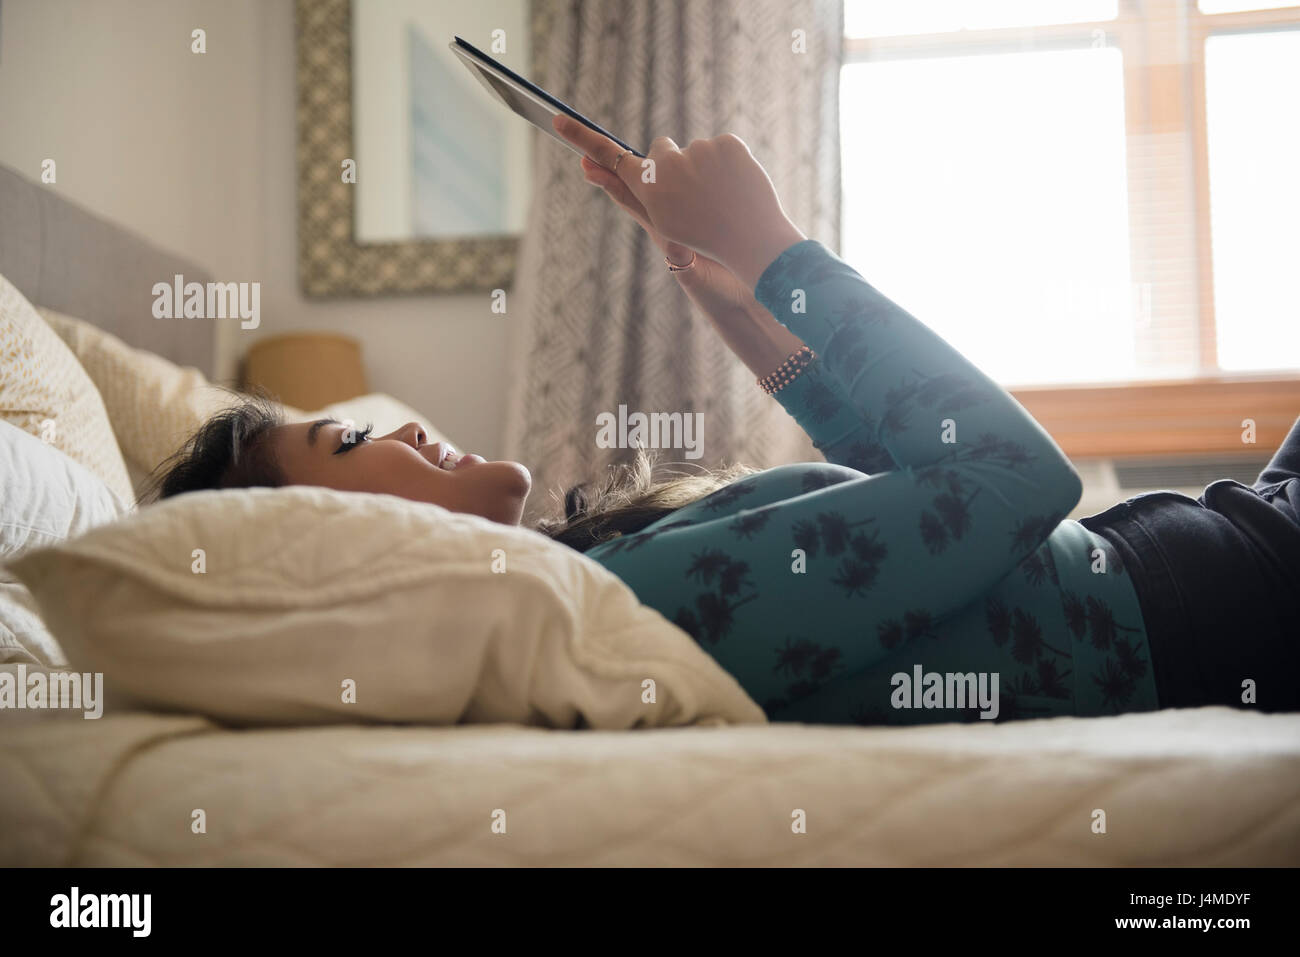 Mixed Race woman laying on bed using digital tablet Stock Photo